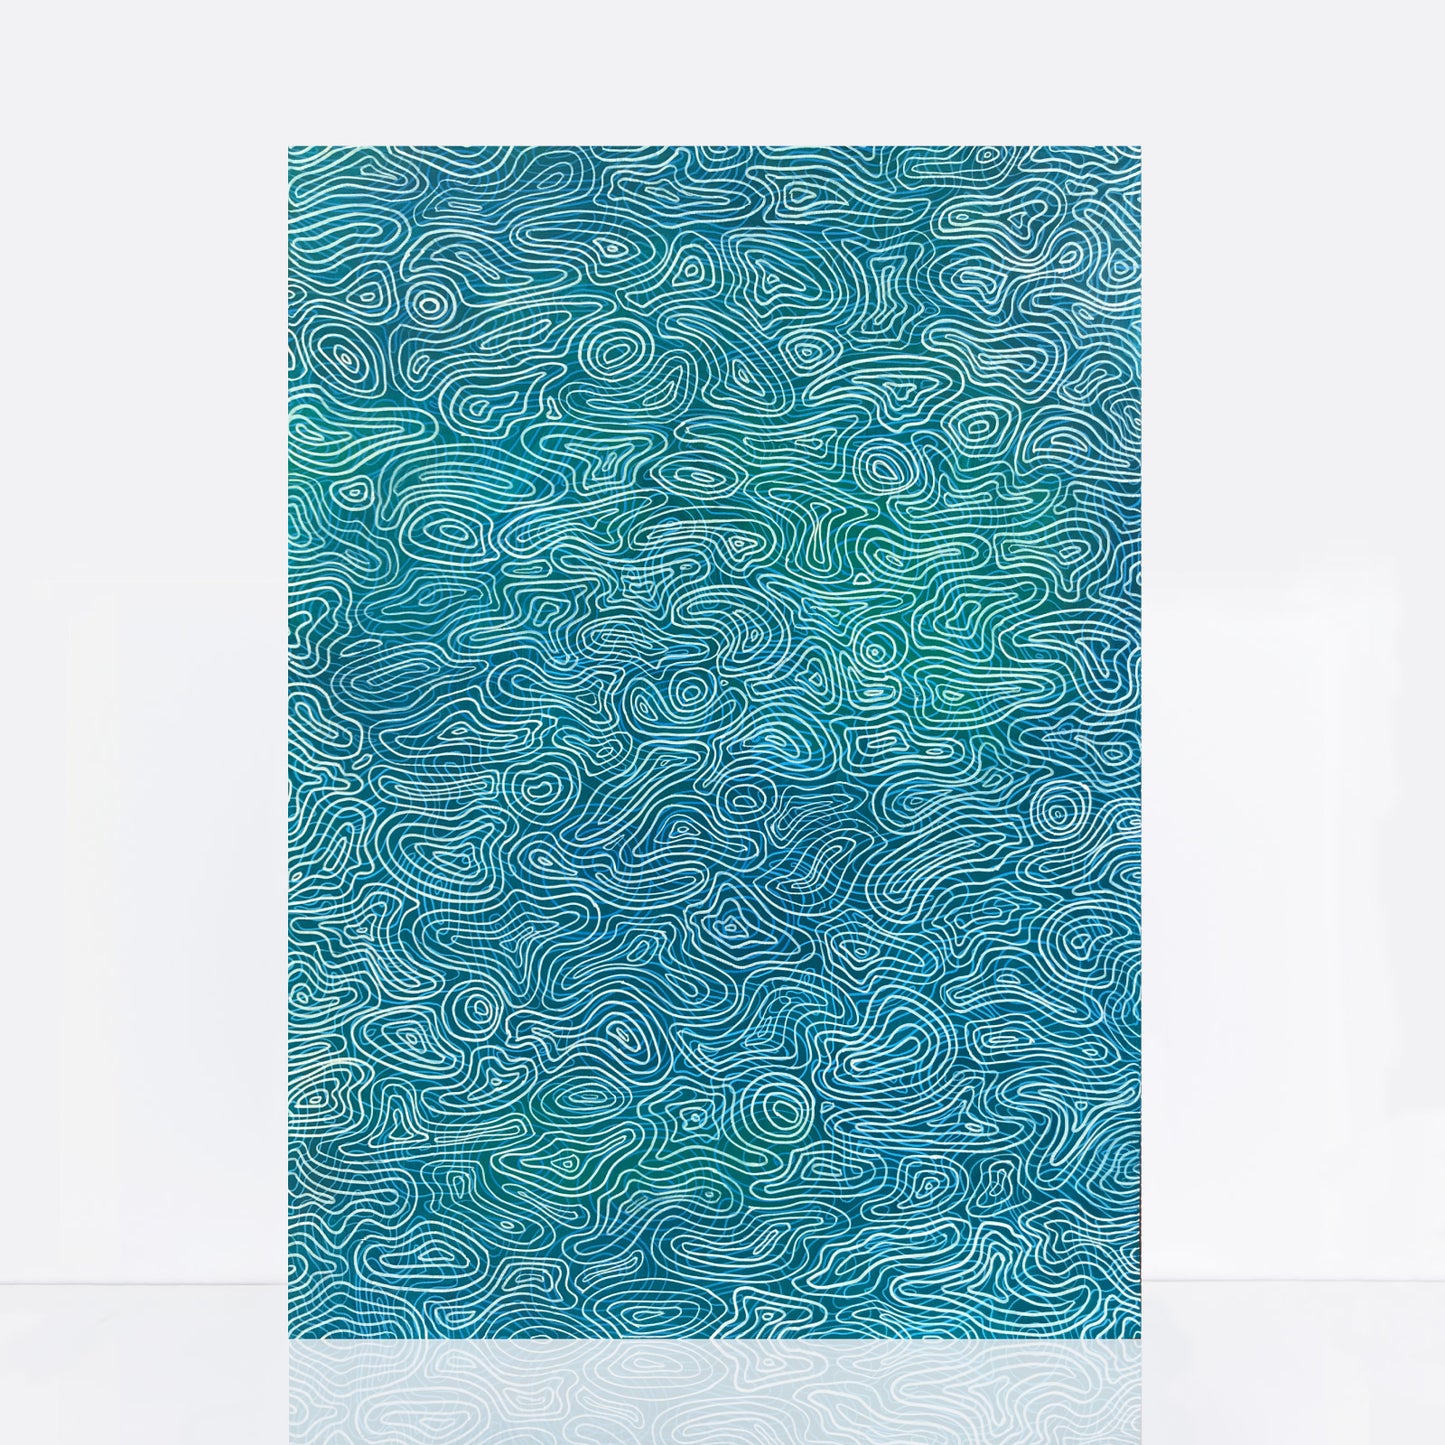 crylic painting on paper that depicts the delicate stylised details of water patterns